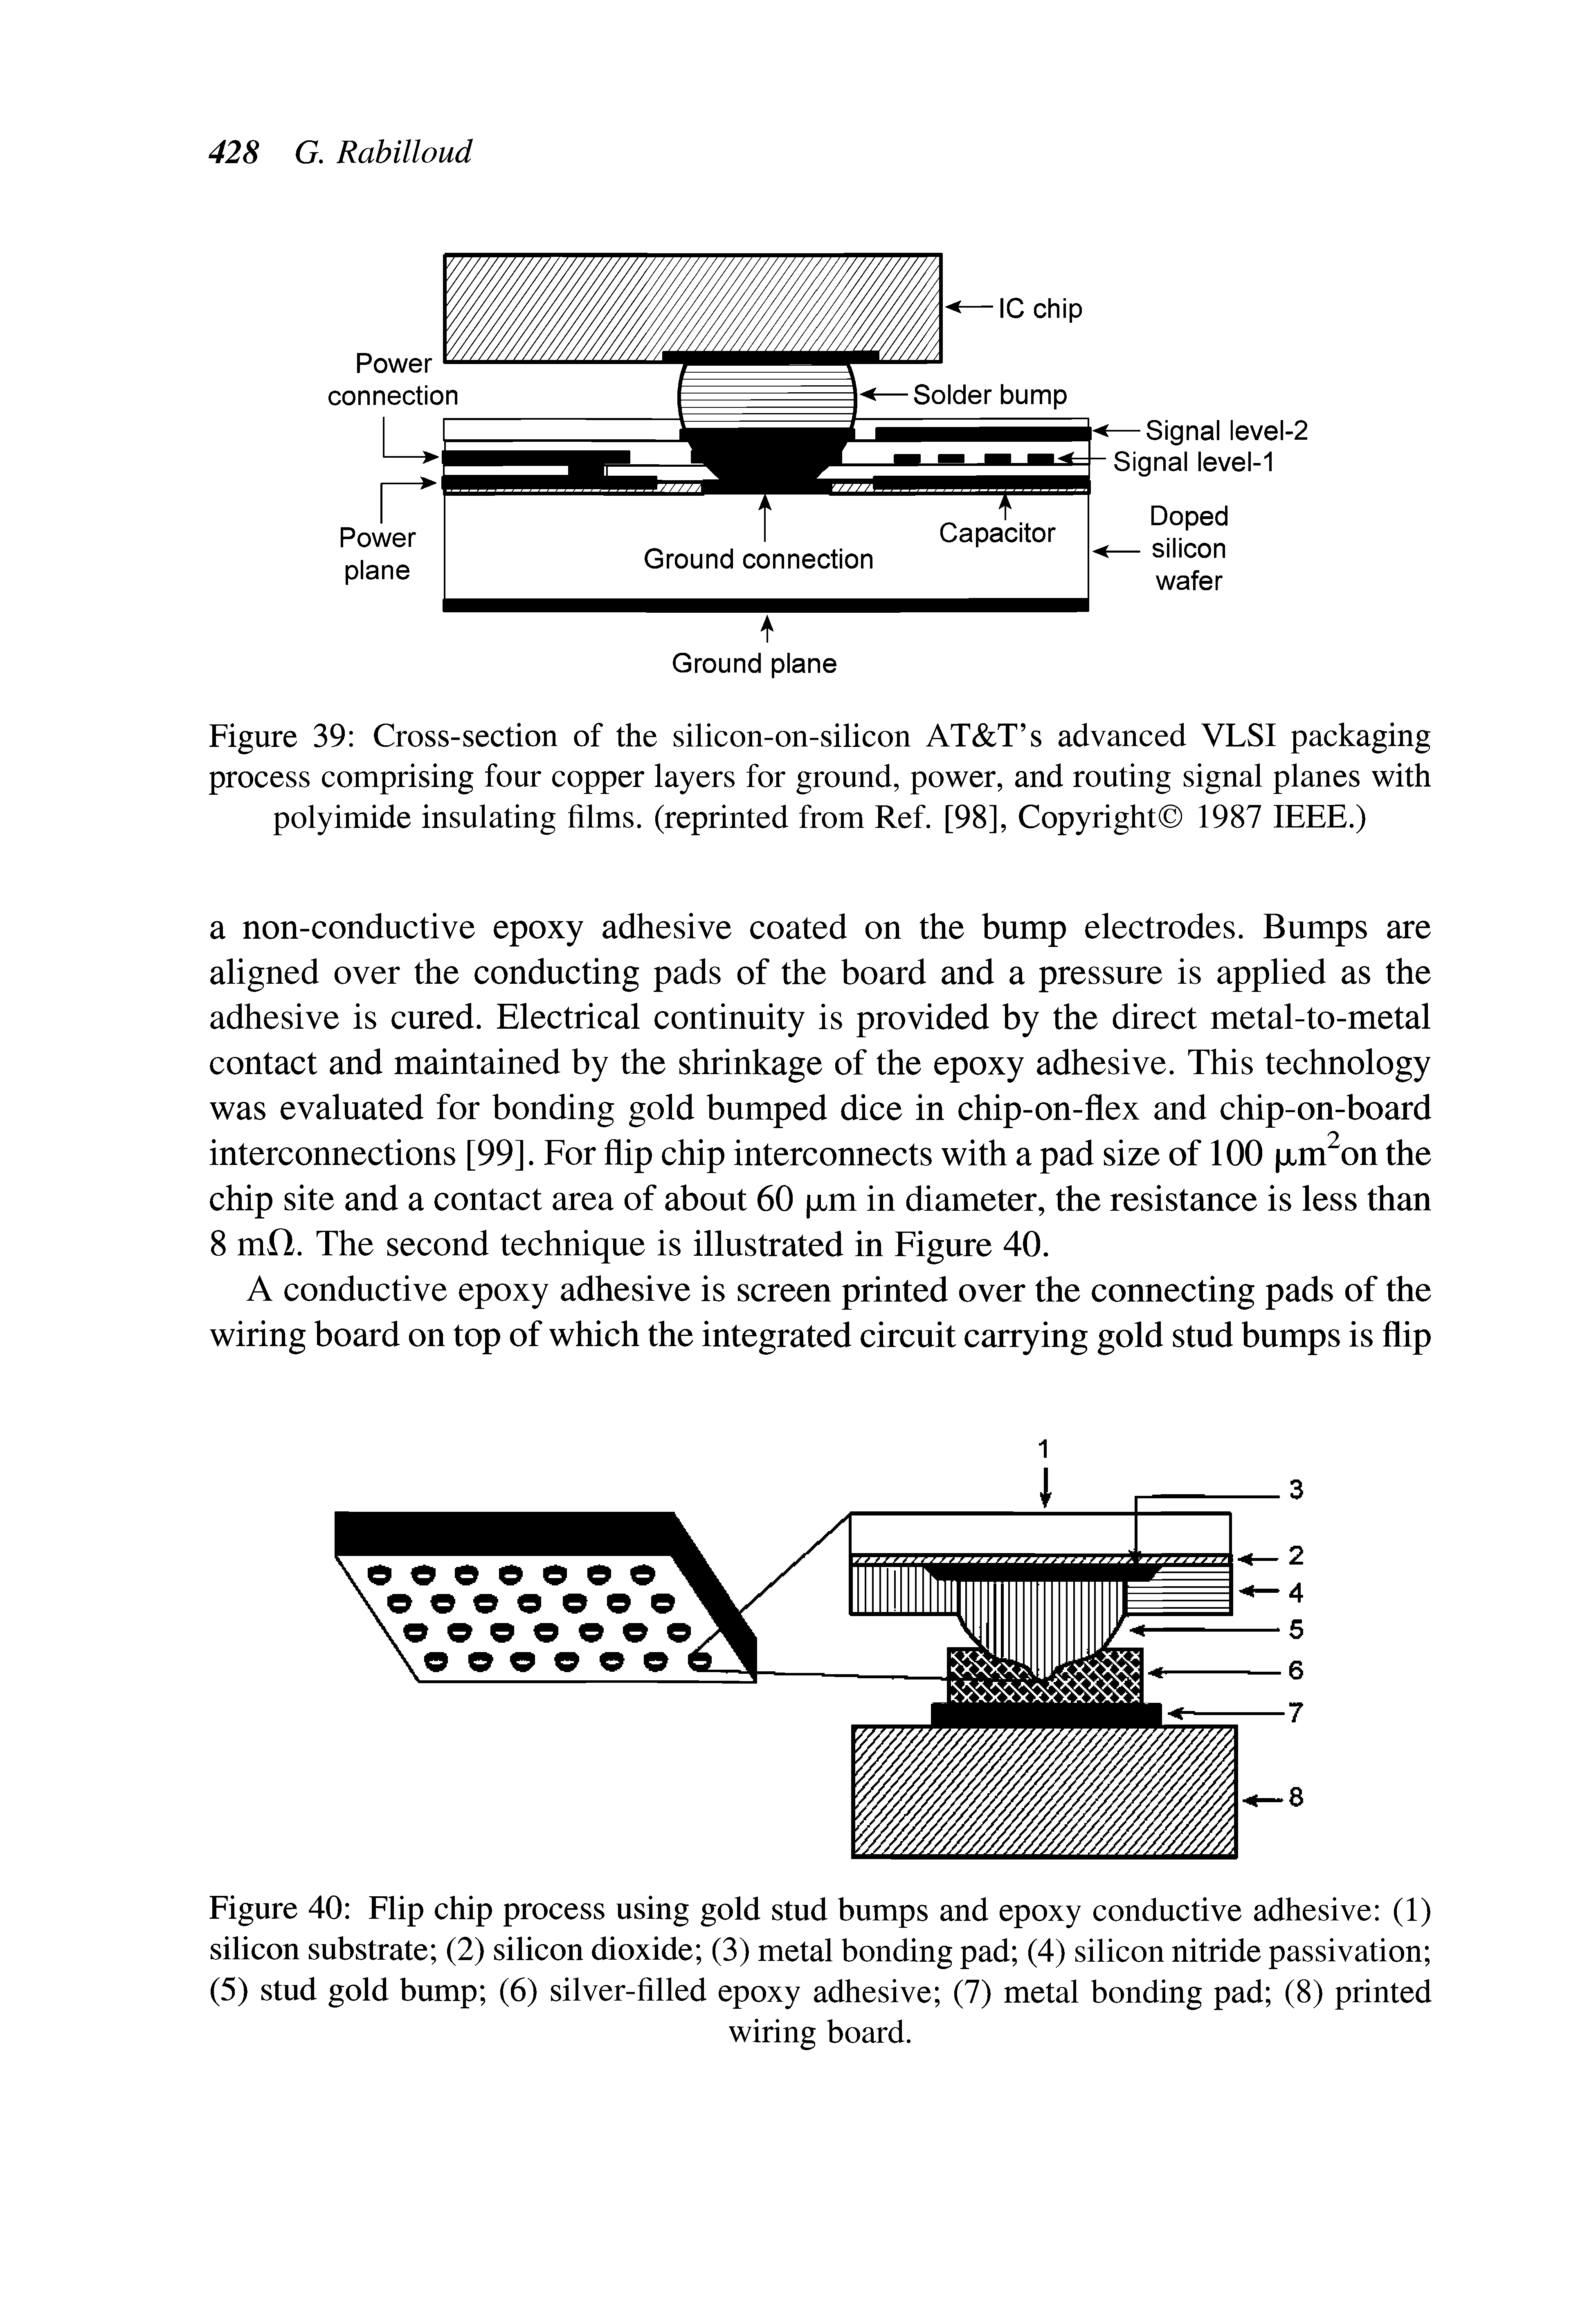 Figure 39 Cross-section of the silicon-on-silicon AT T s advanced VLSI packaging process comprising four copper layers for ground, power, and routing signal planes with polyimide insulating films, (reprinted from Ref. [98], Copyright 1987 IEEE.)...